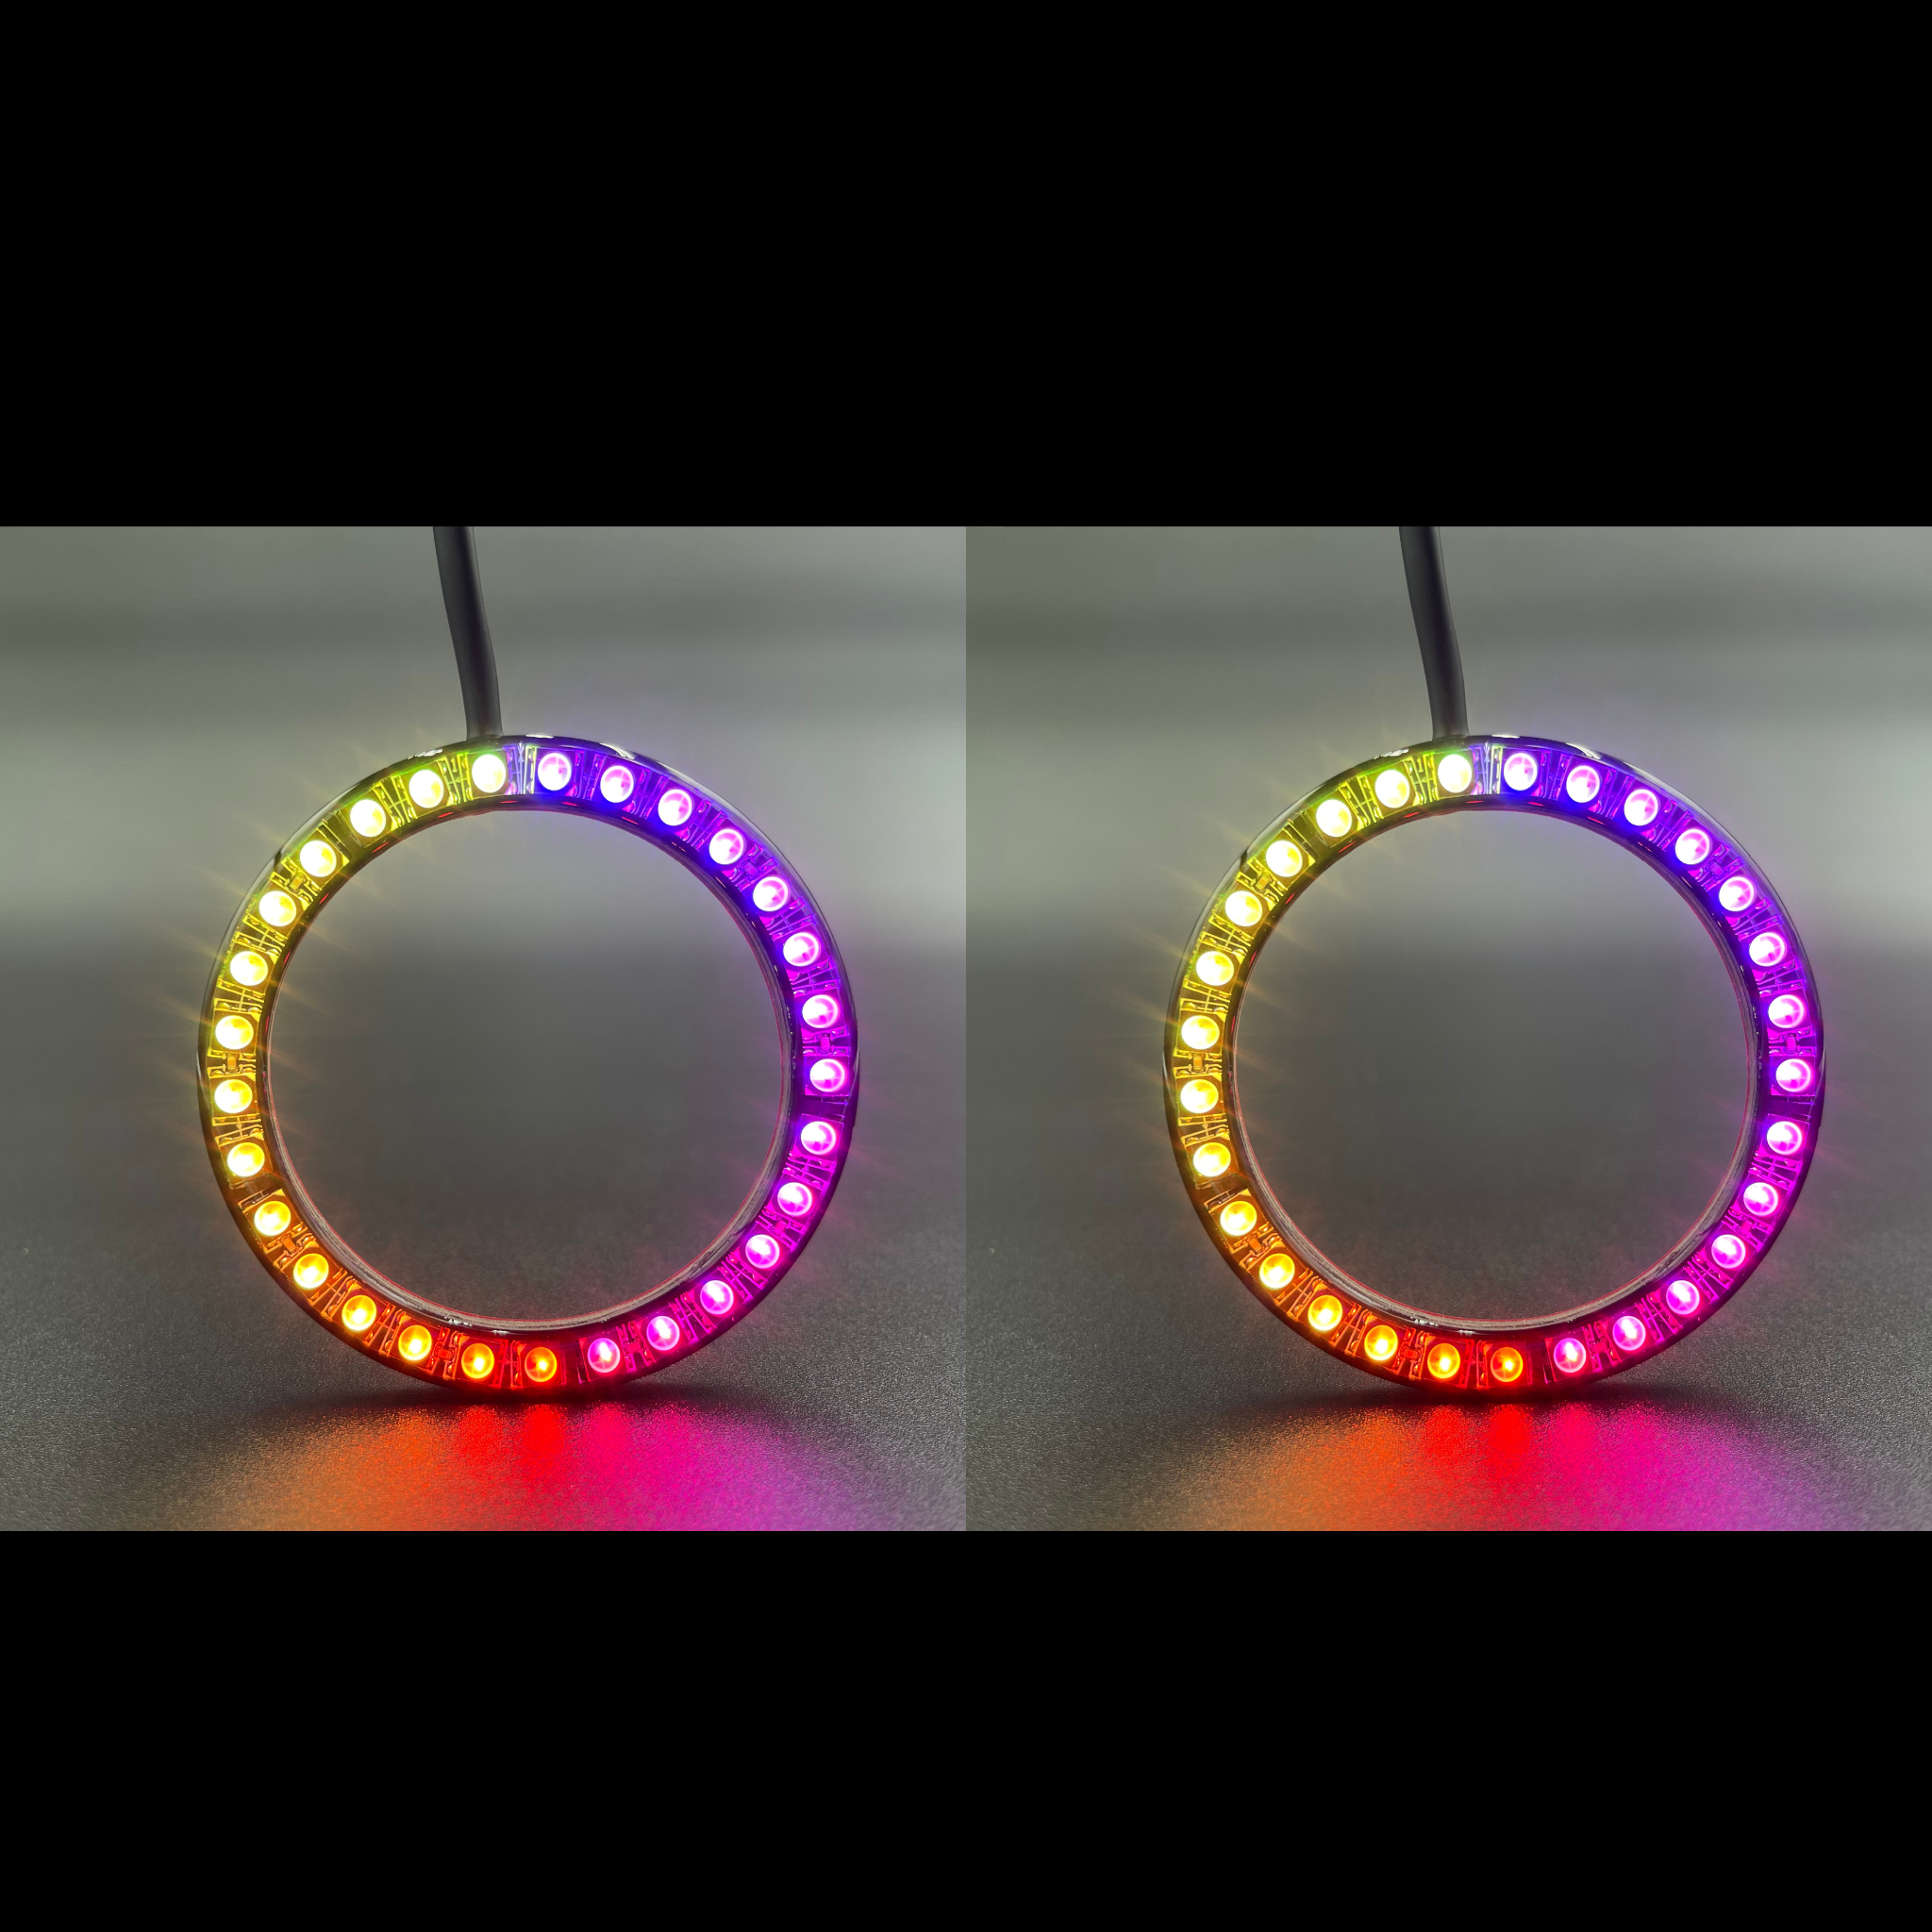 2005-2007 Ford Focus Multicolor Halo Kit - RGB Halo Kits Multicolor Flow Series Color Chasing RGBWA LED headlight kit Colorshift Oracle Lighting Trendz OneUpLighting Morimoto theretrofitsource AutoLEDTech Diode Dynamics